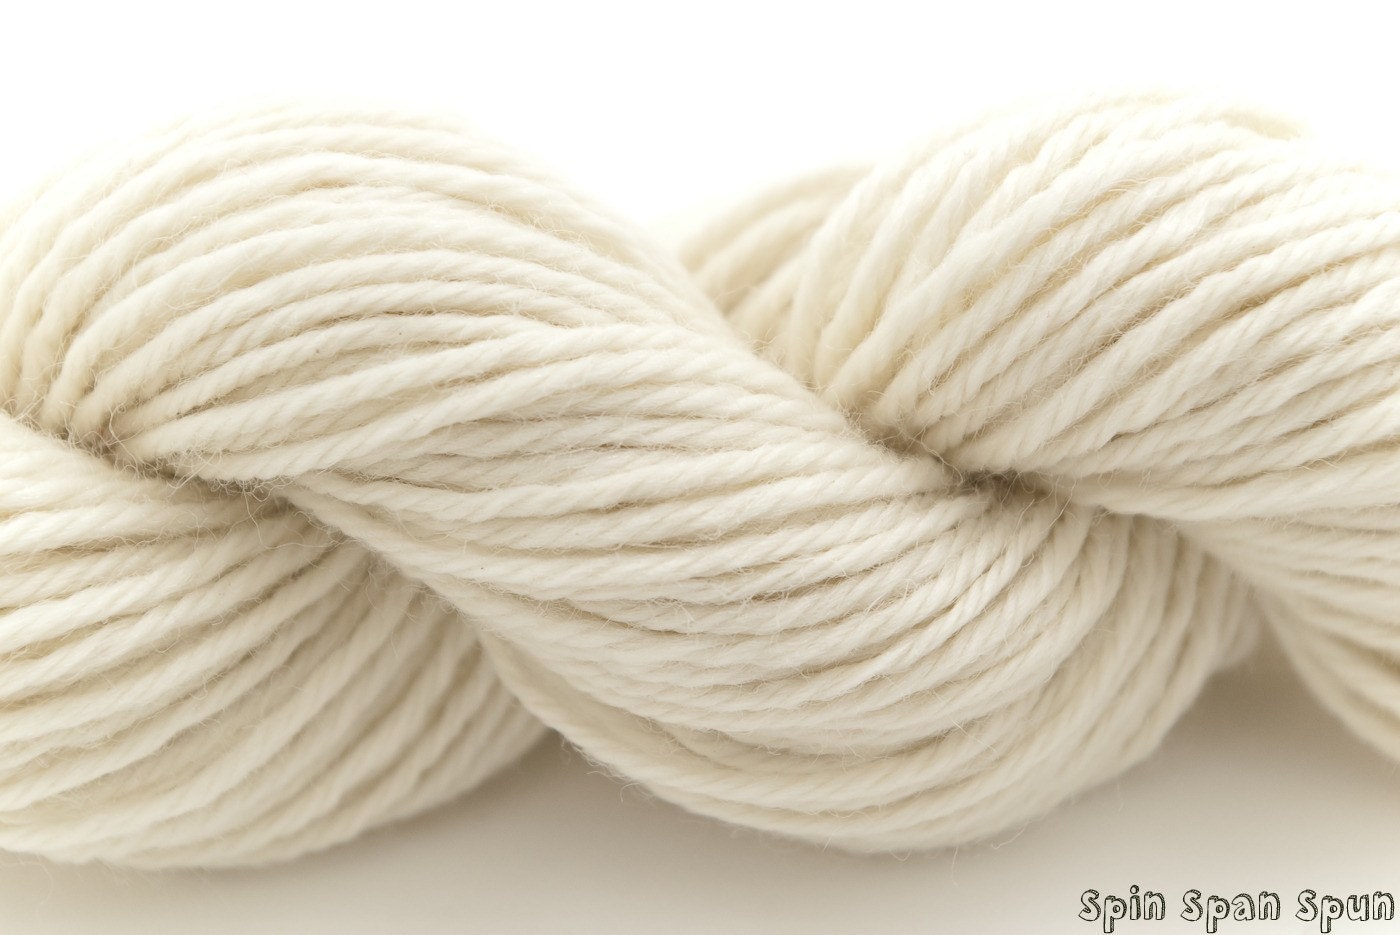 Just Natural Organic Merino yarn, white, worsted, 120 y, unbleached and undyed